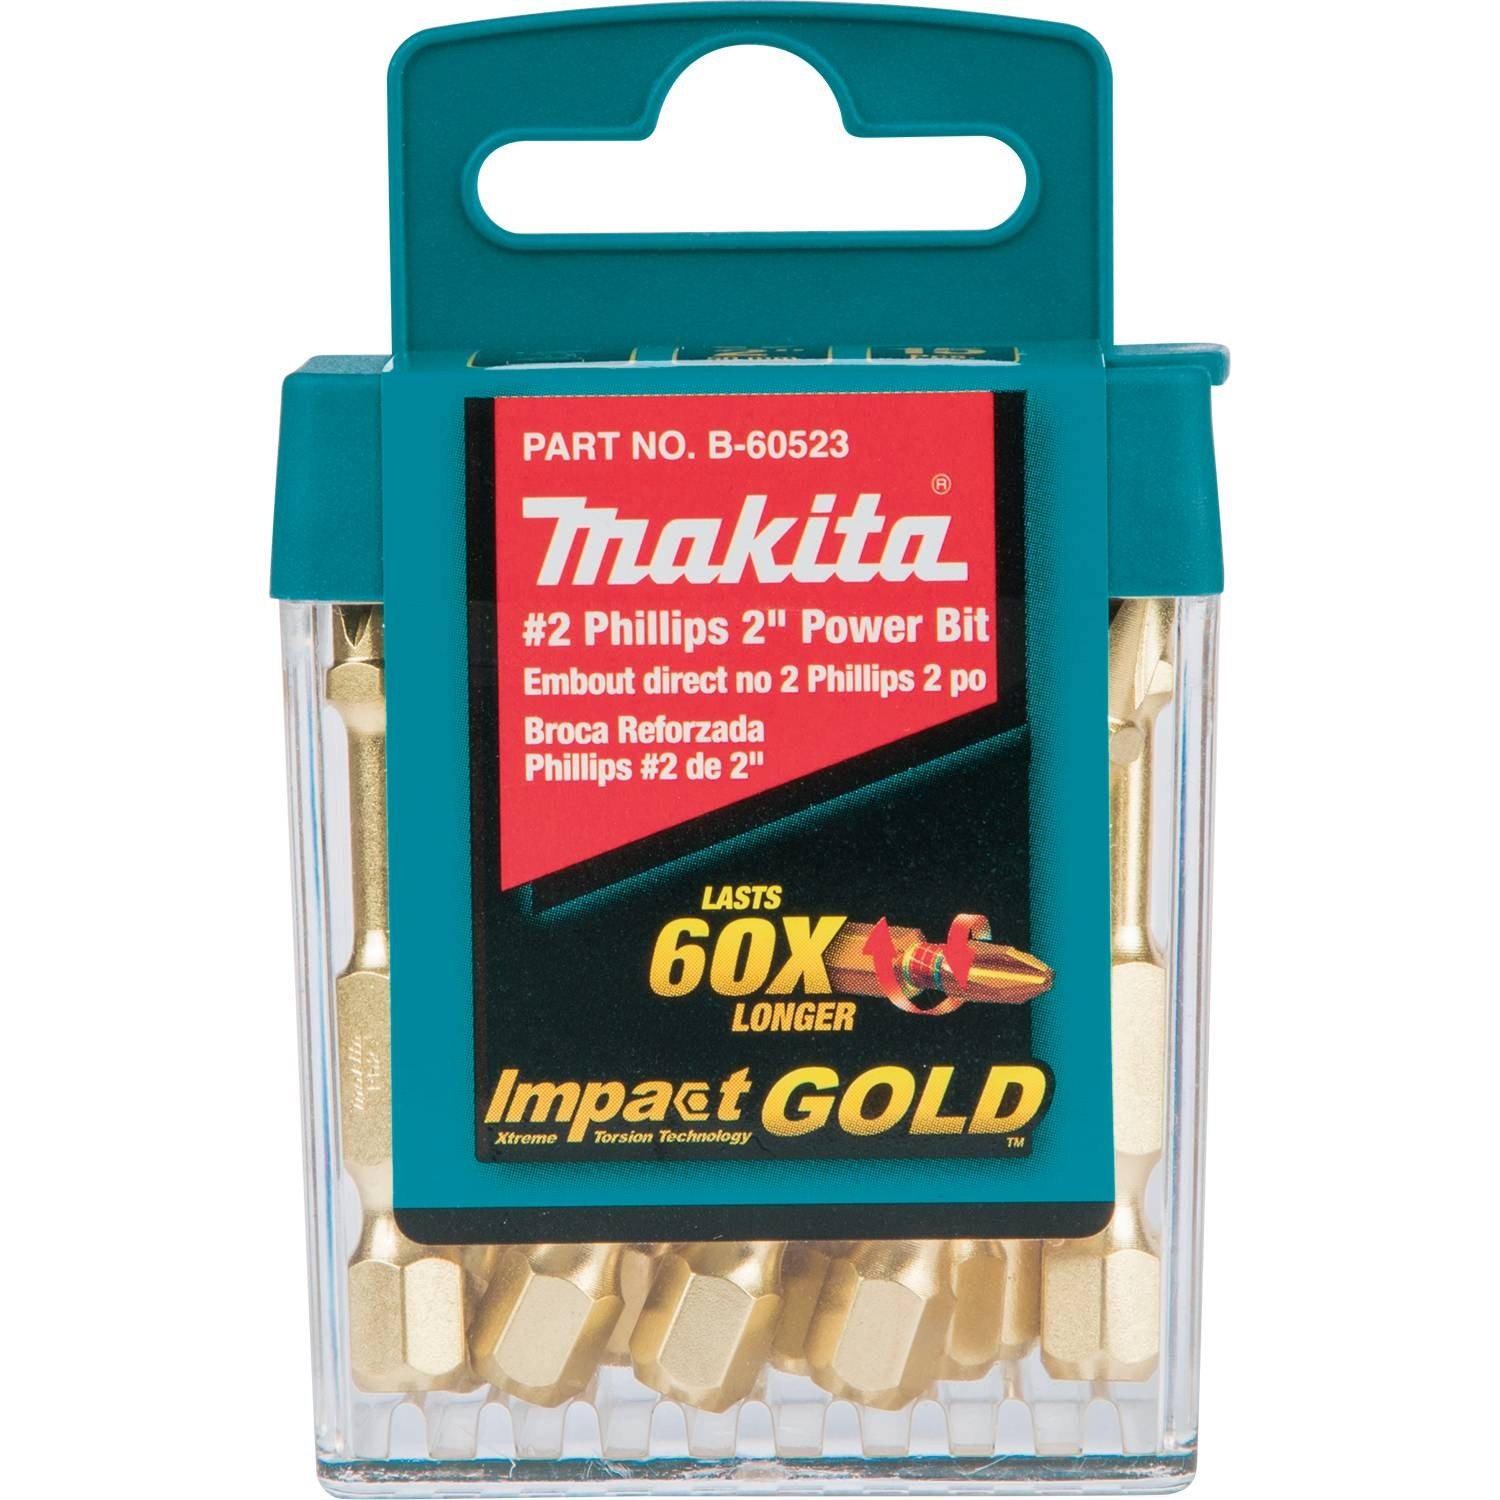 15-Piece Makita Impact Gold #2 Phillips 2'' Power Bit (B-60523) $8.81 + Free Shipping w/ Prime or on orders $25+